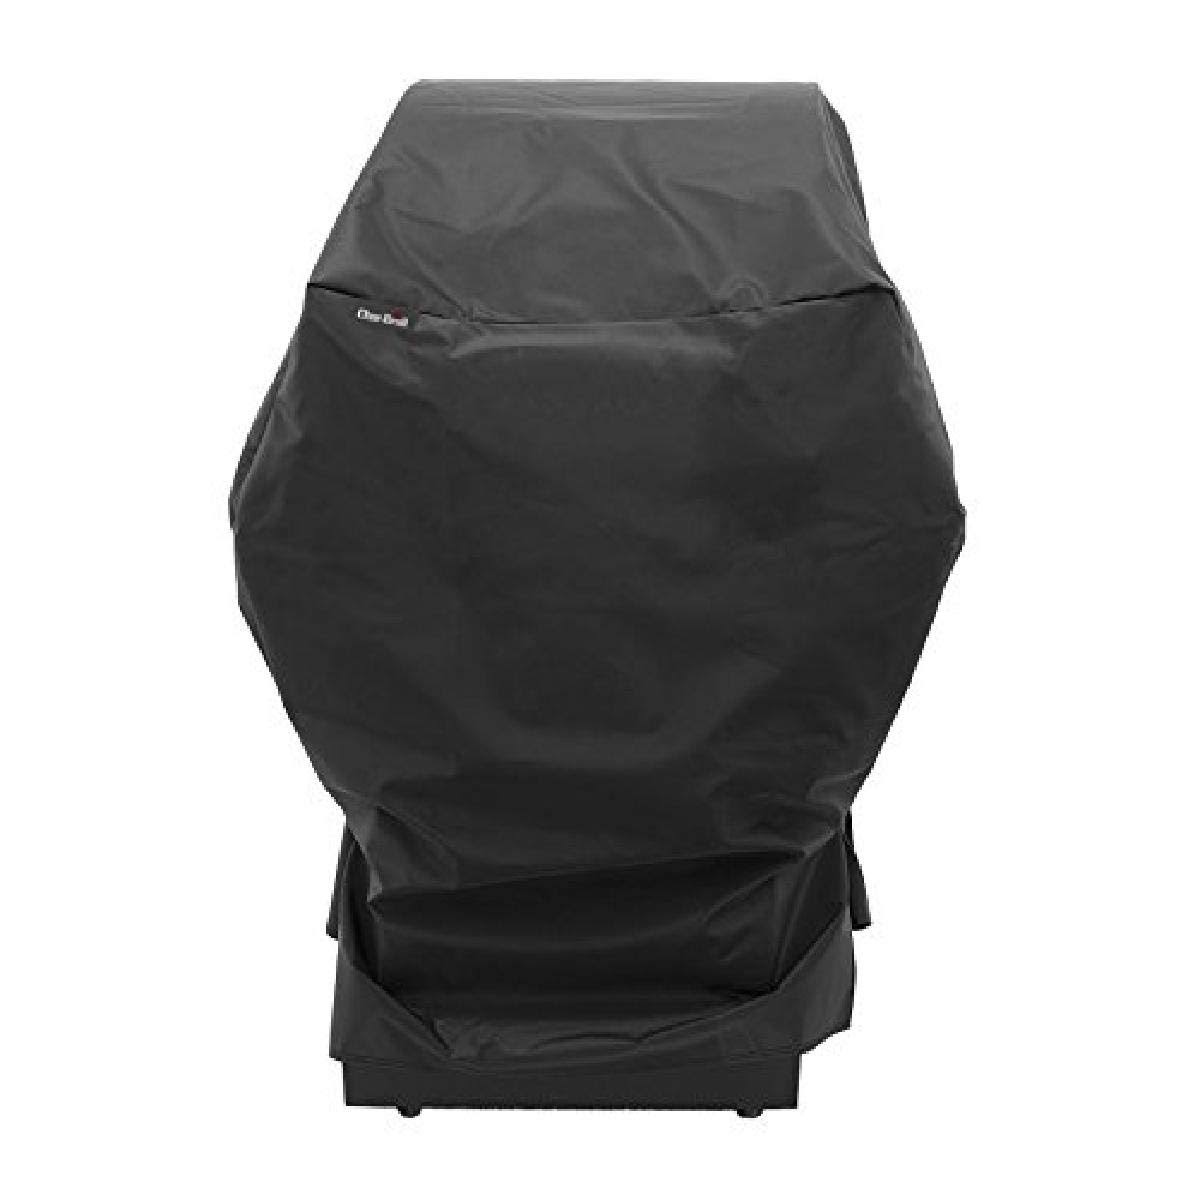 Char-Broil 1113756 Small Grill & Smoker Performance Grill Cover